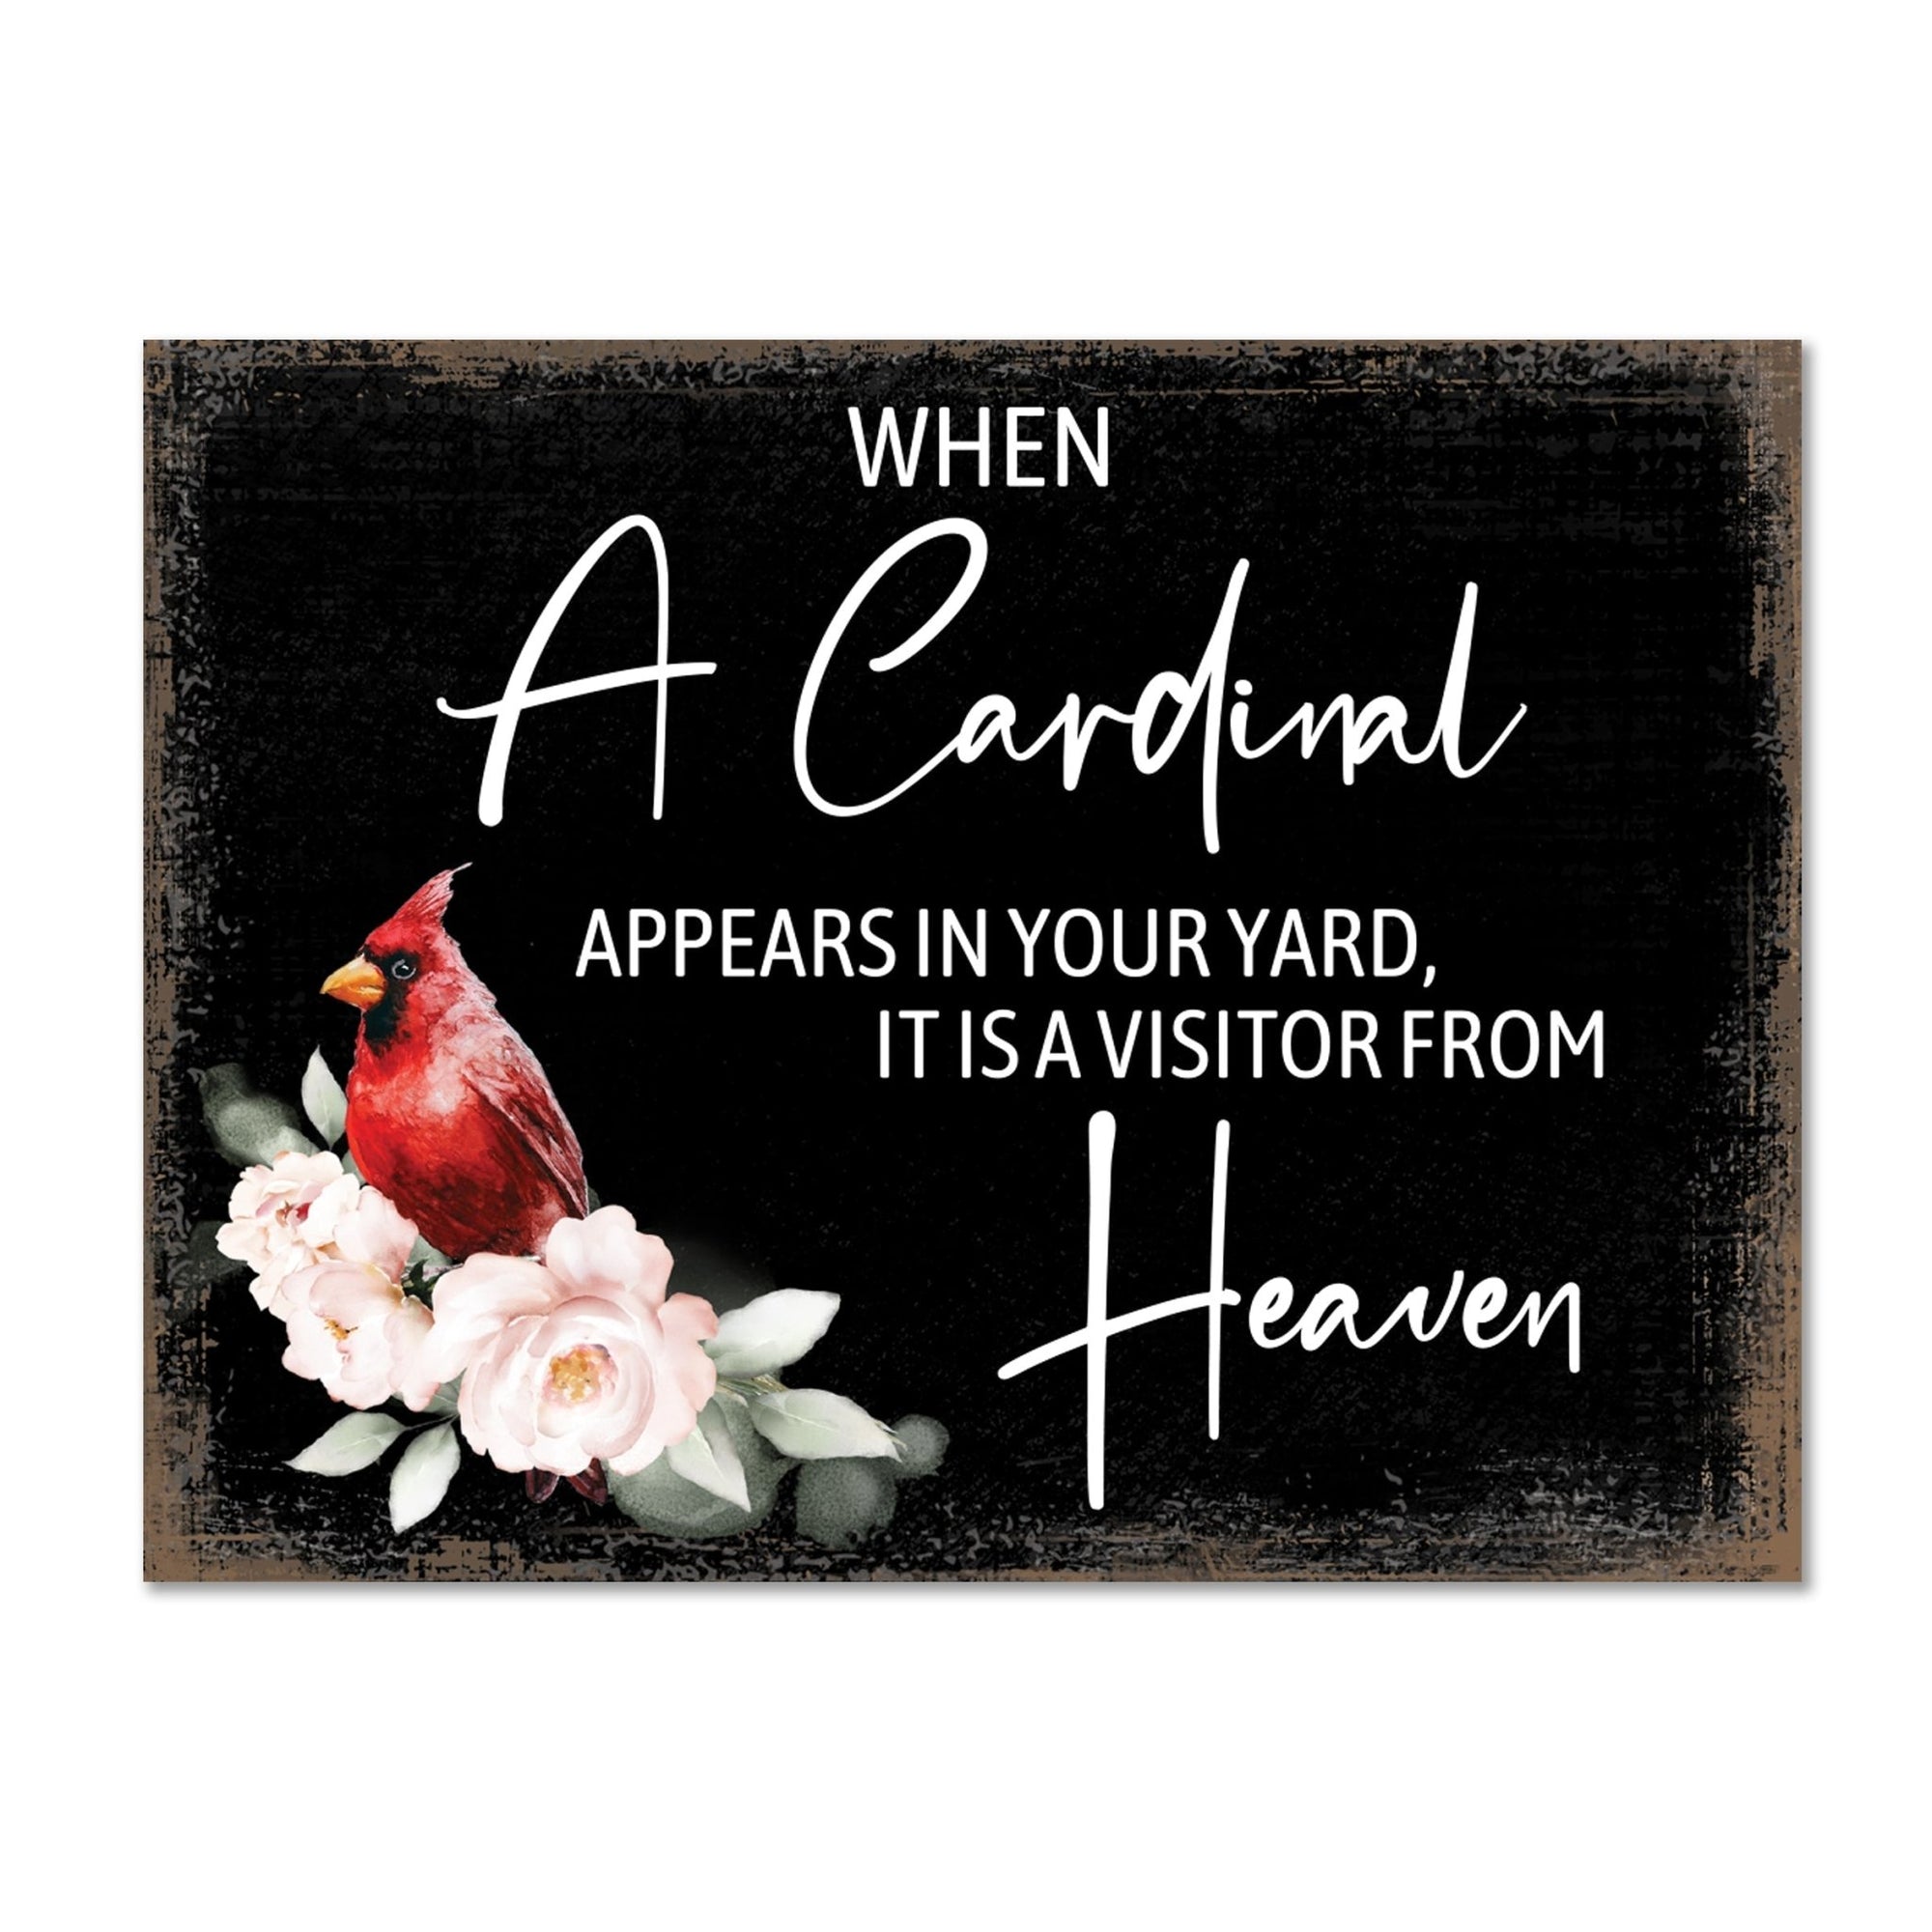 Lifesong Milestones Modern Cardinal Memorial Magnet: A thoughtful and elegant cardinal gift for your loved one's memory.